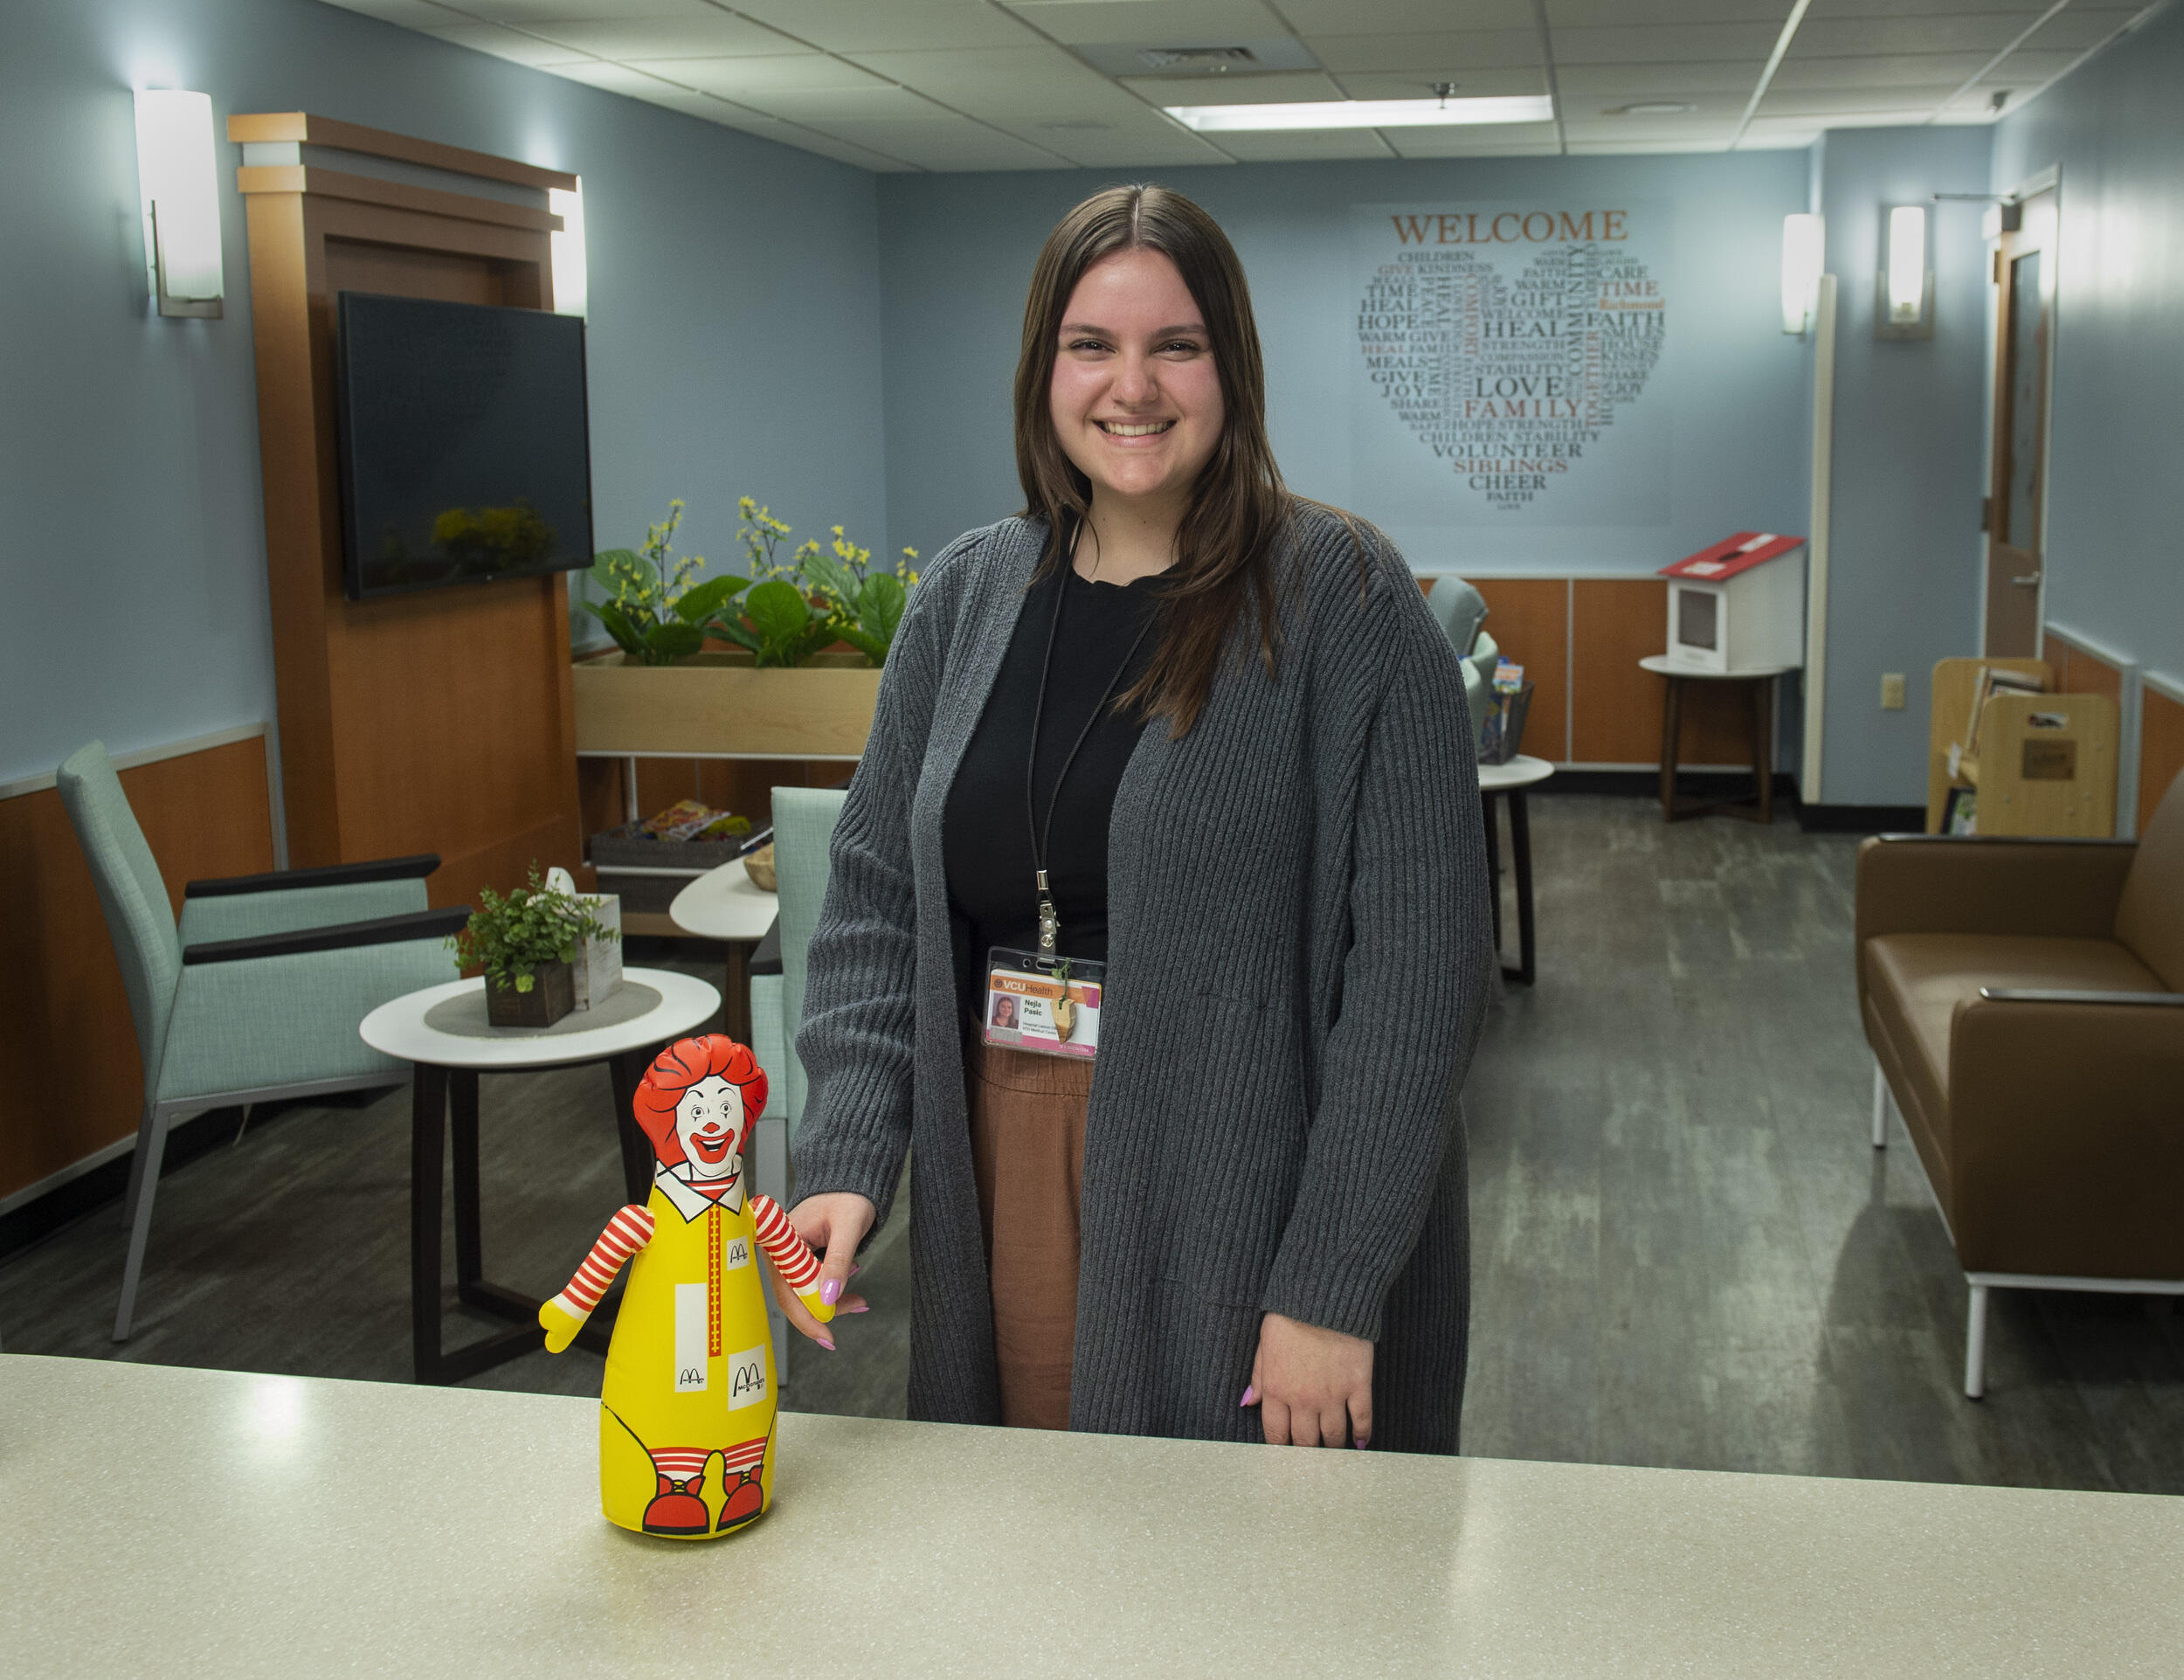 A woman standing in a room smiling. In front of her is a table with a red and yellow clown toy. 